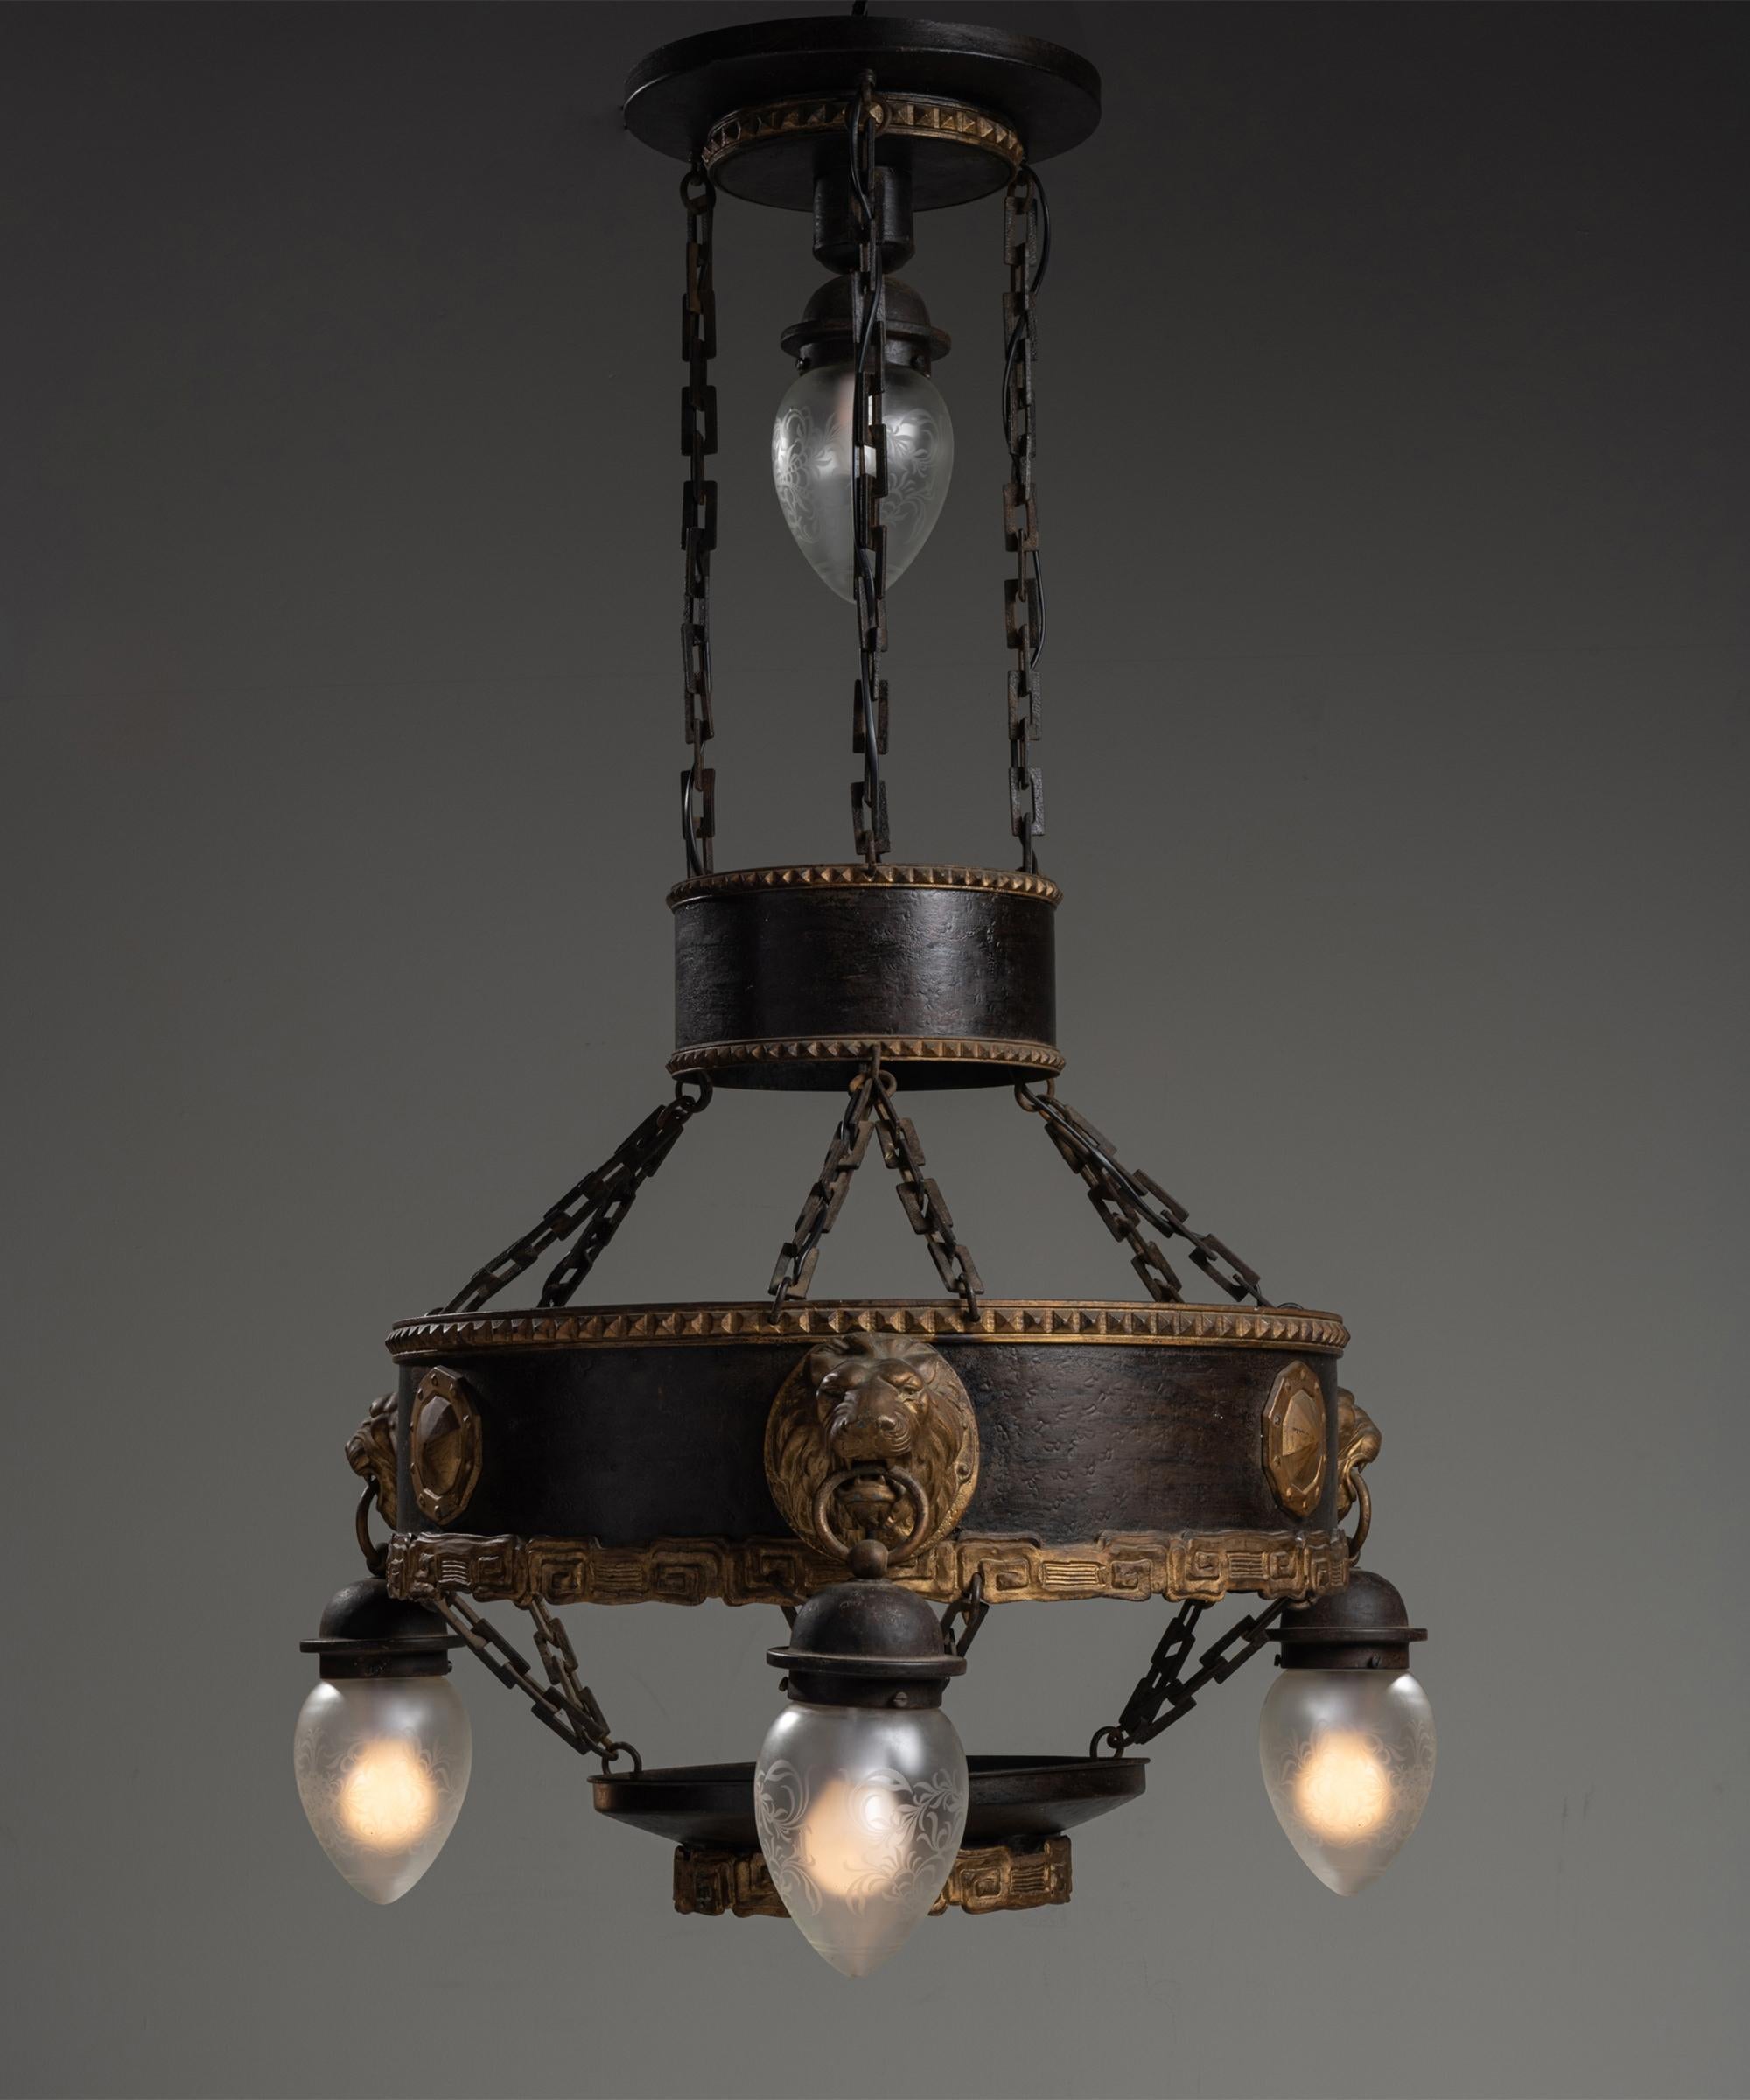 Unique metal chandelier, France, circa 1920

Iron chandelier with gilt framework, and lions heads holding etched glass pendants.

Measures: 29.5